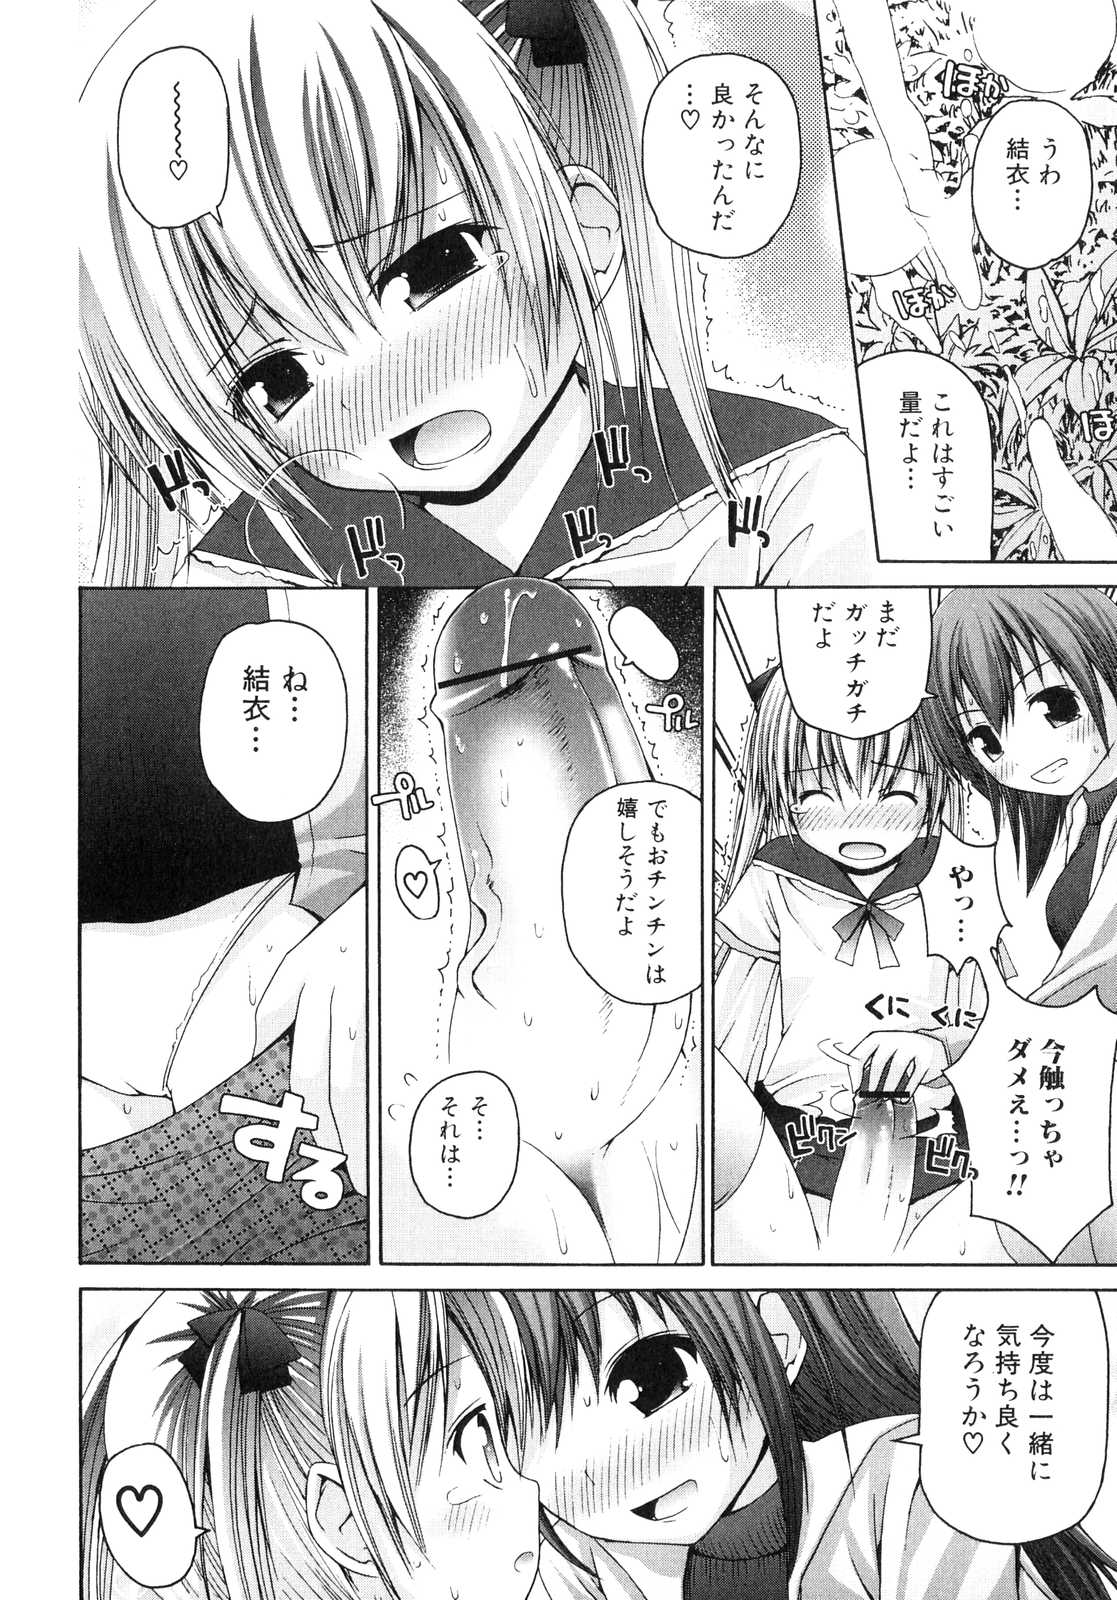 yui PureHeart page 10 full